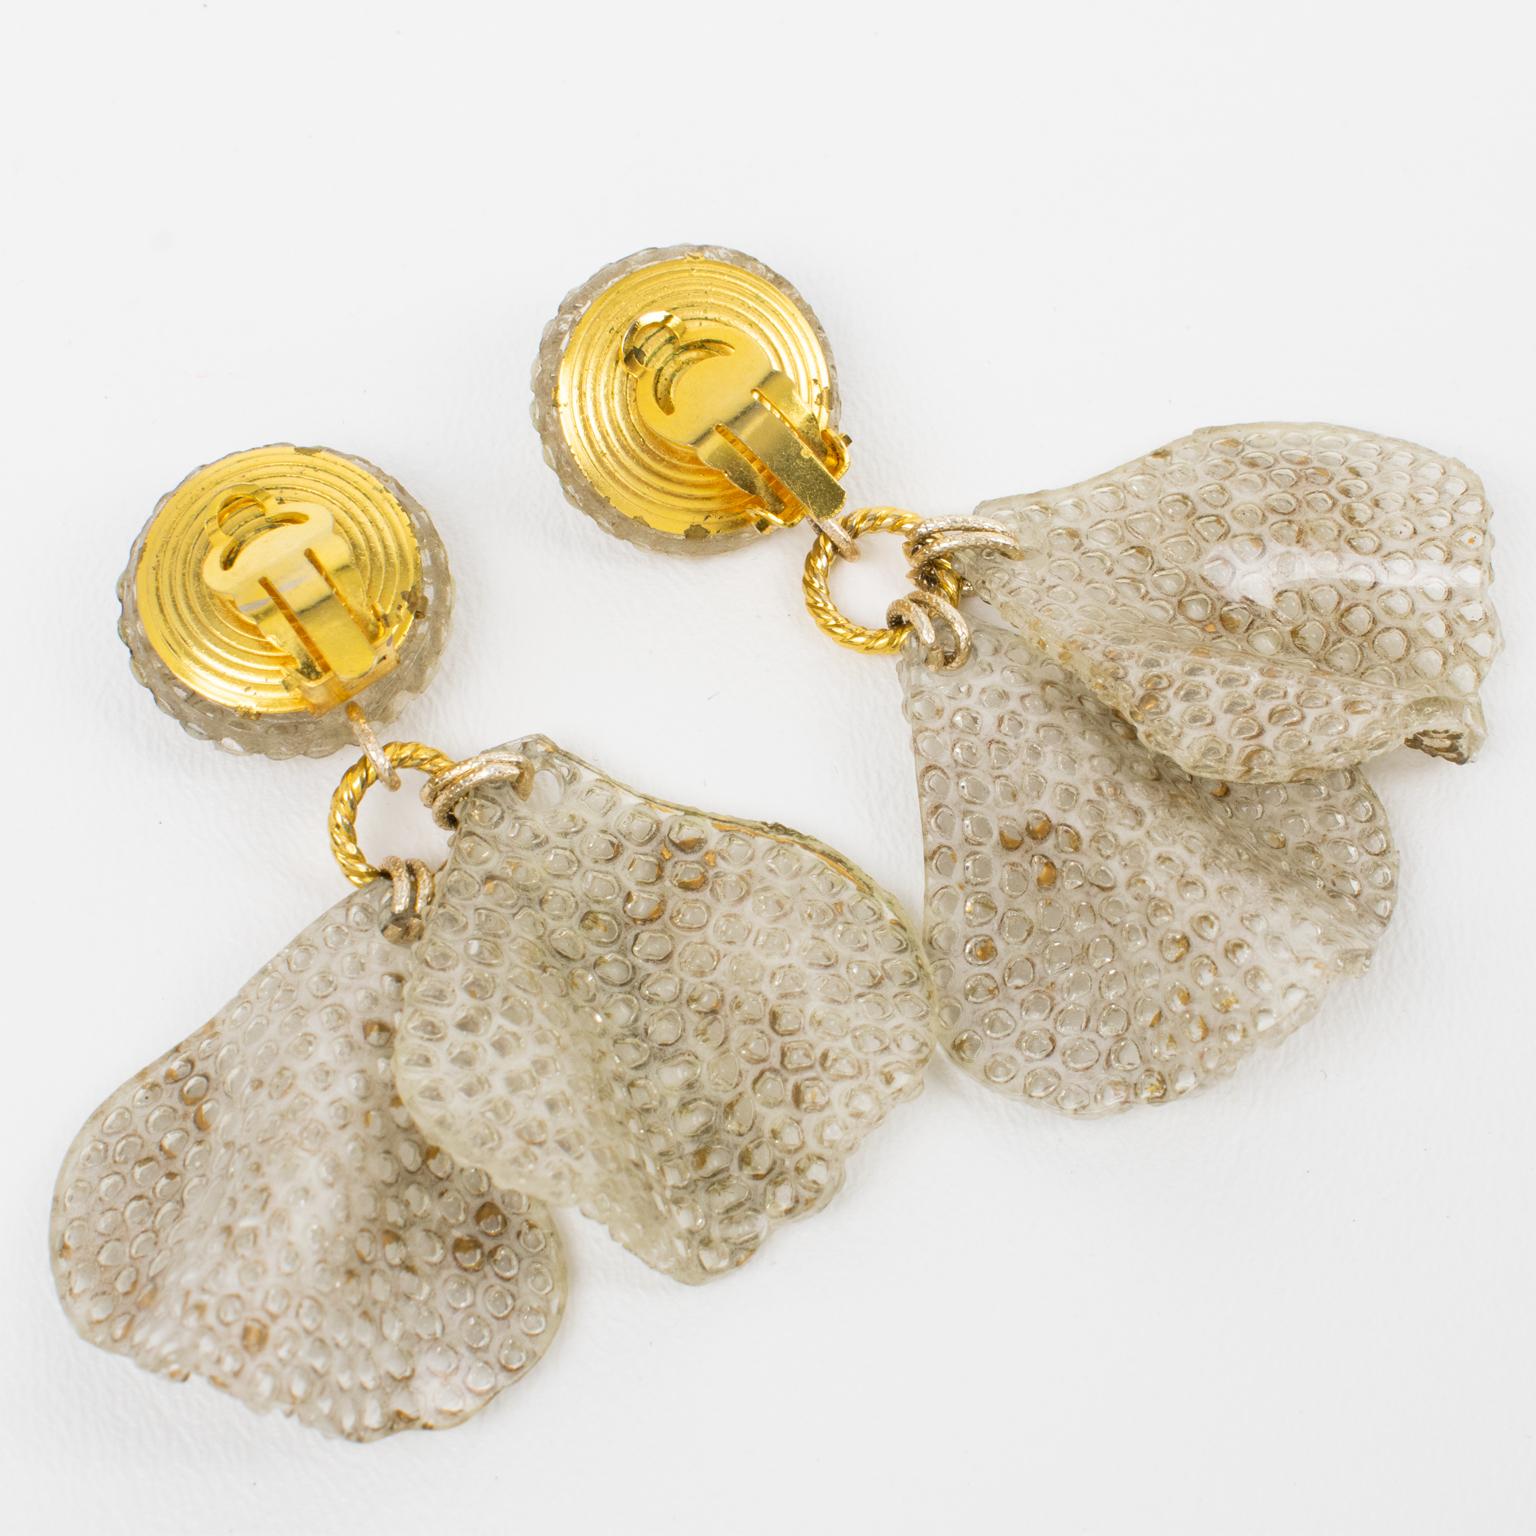 Francoise Montague by Cilea Resin Clip Earrings Dangle Textured Gilded Petals In Excellent Condition For Sale In Atlanta, GA